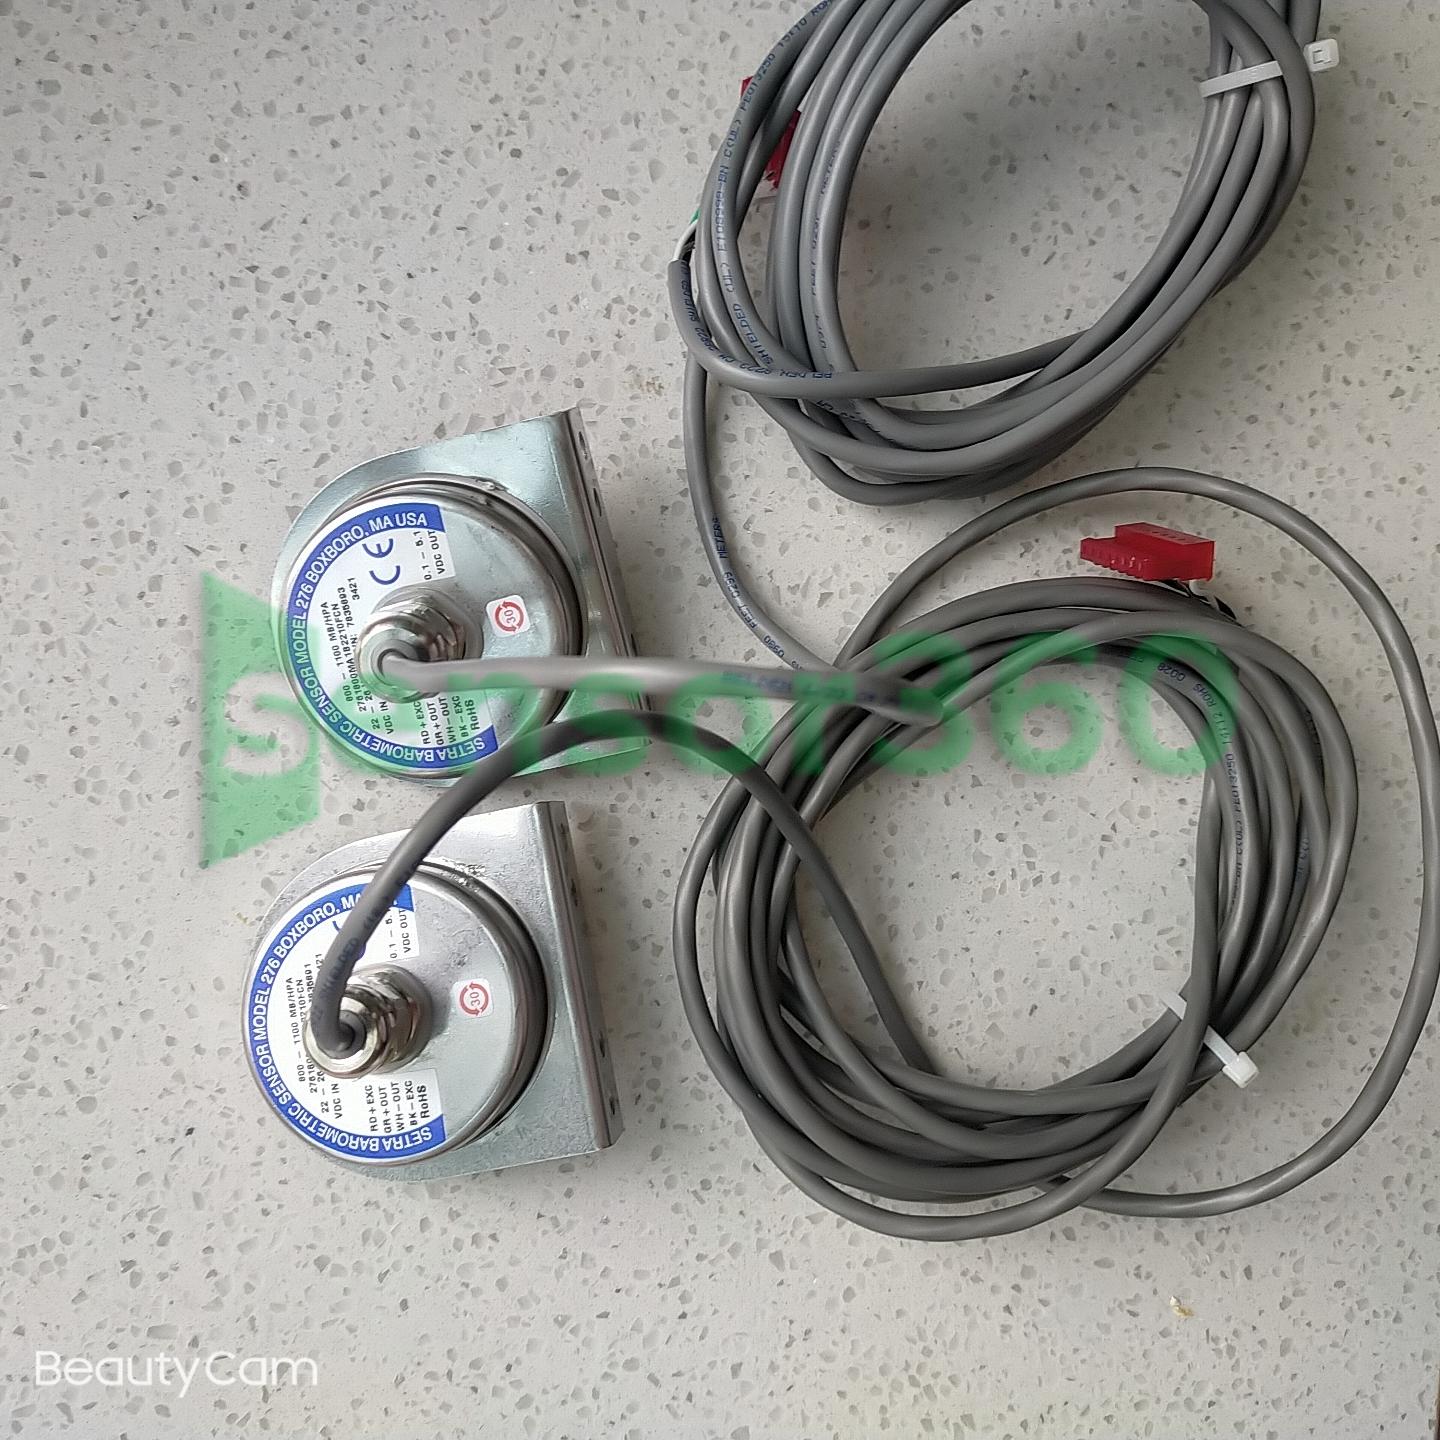 276 atmospheric pressure transmitter commonly used models